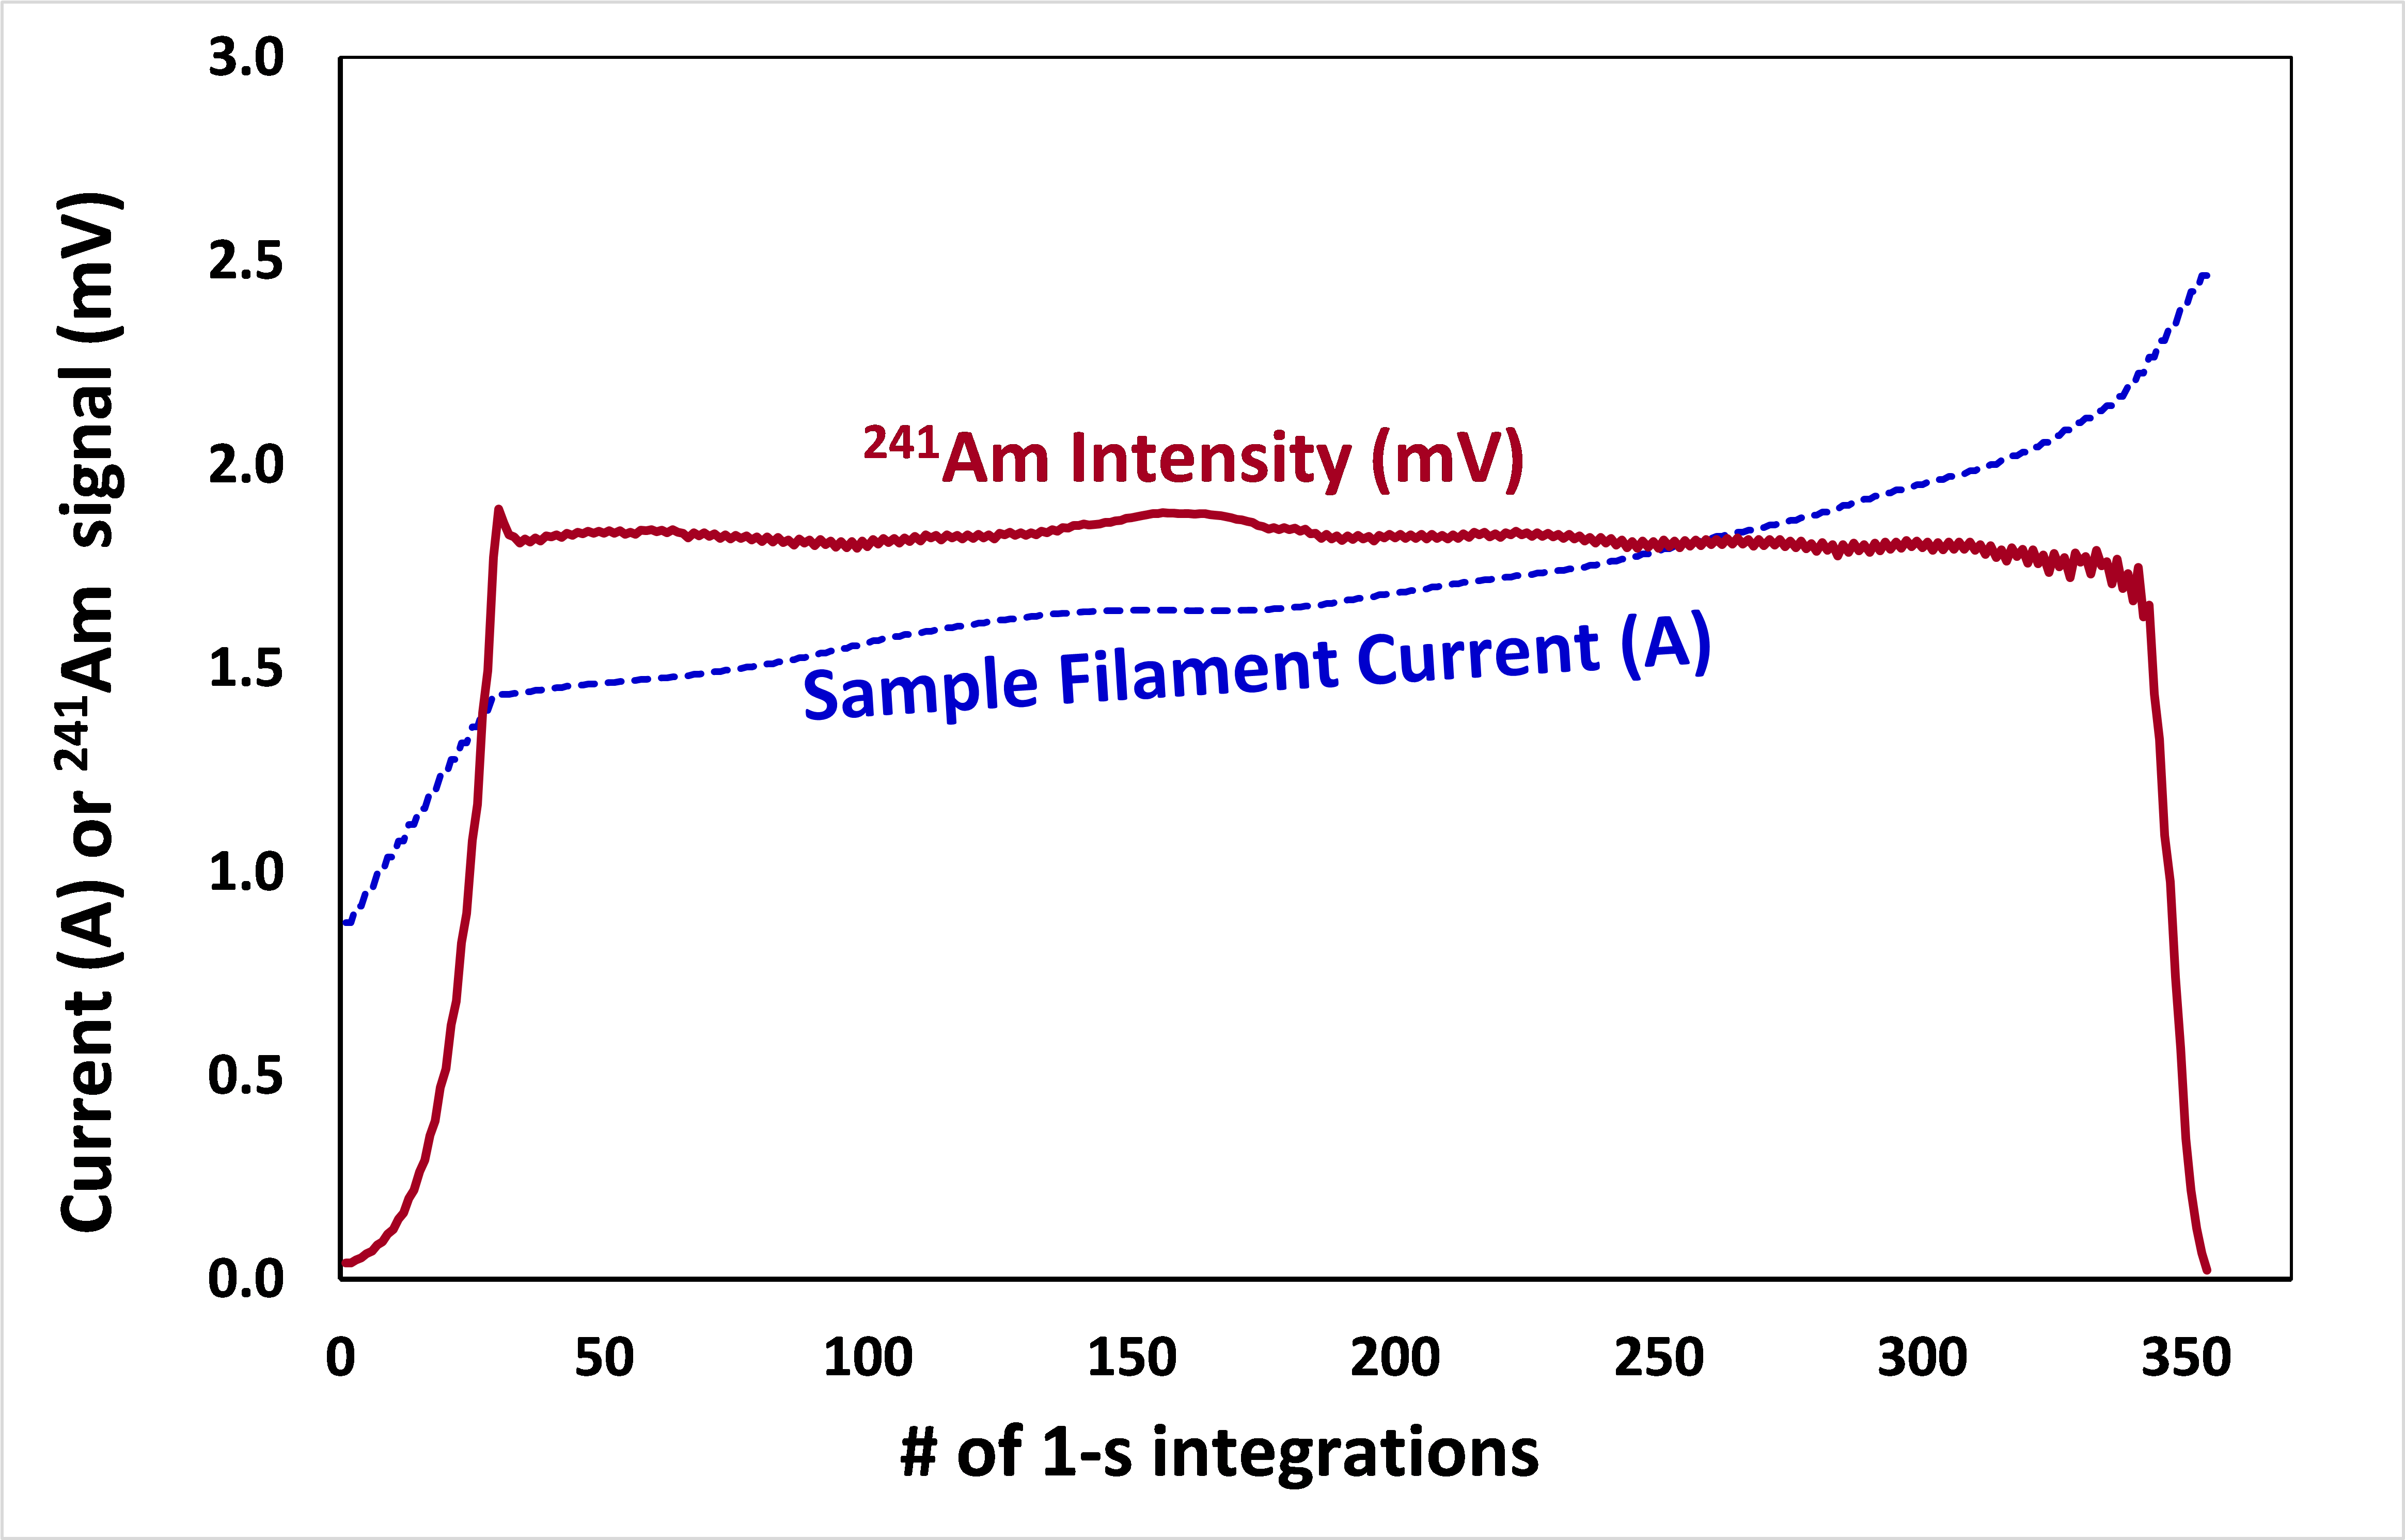 Evaporation filament current (A) and Am-241 signal intensities (mV) (top) 